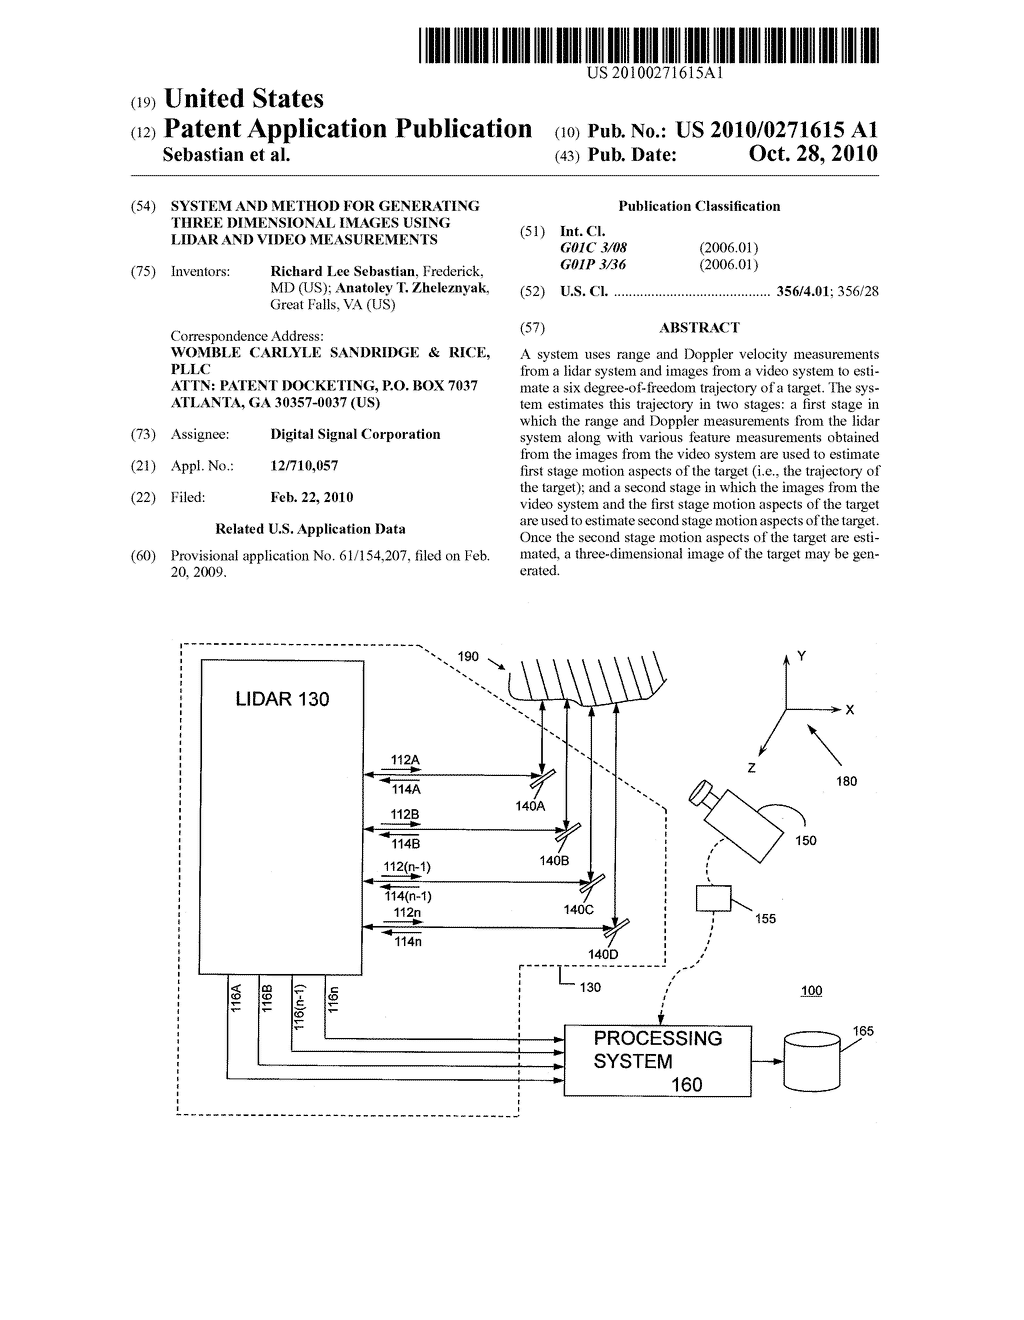 System and Method for Generating Three Dimensional Images Using Lidar and Video Measurements - diagram, schematic, and image 01